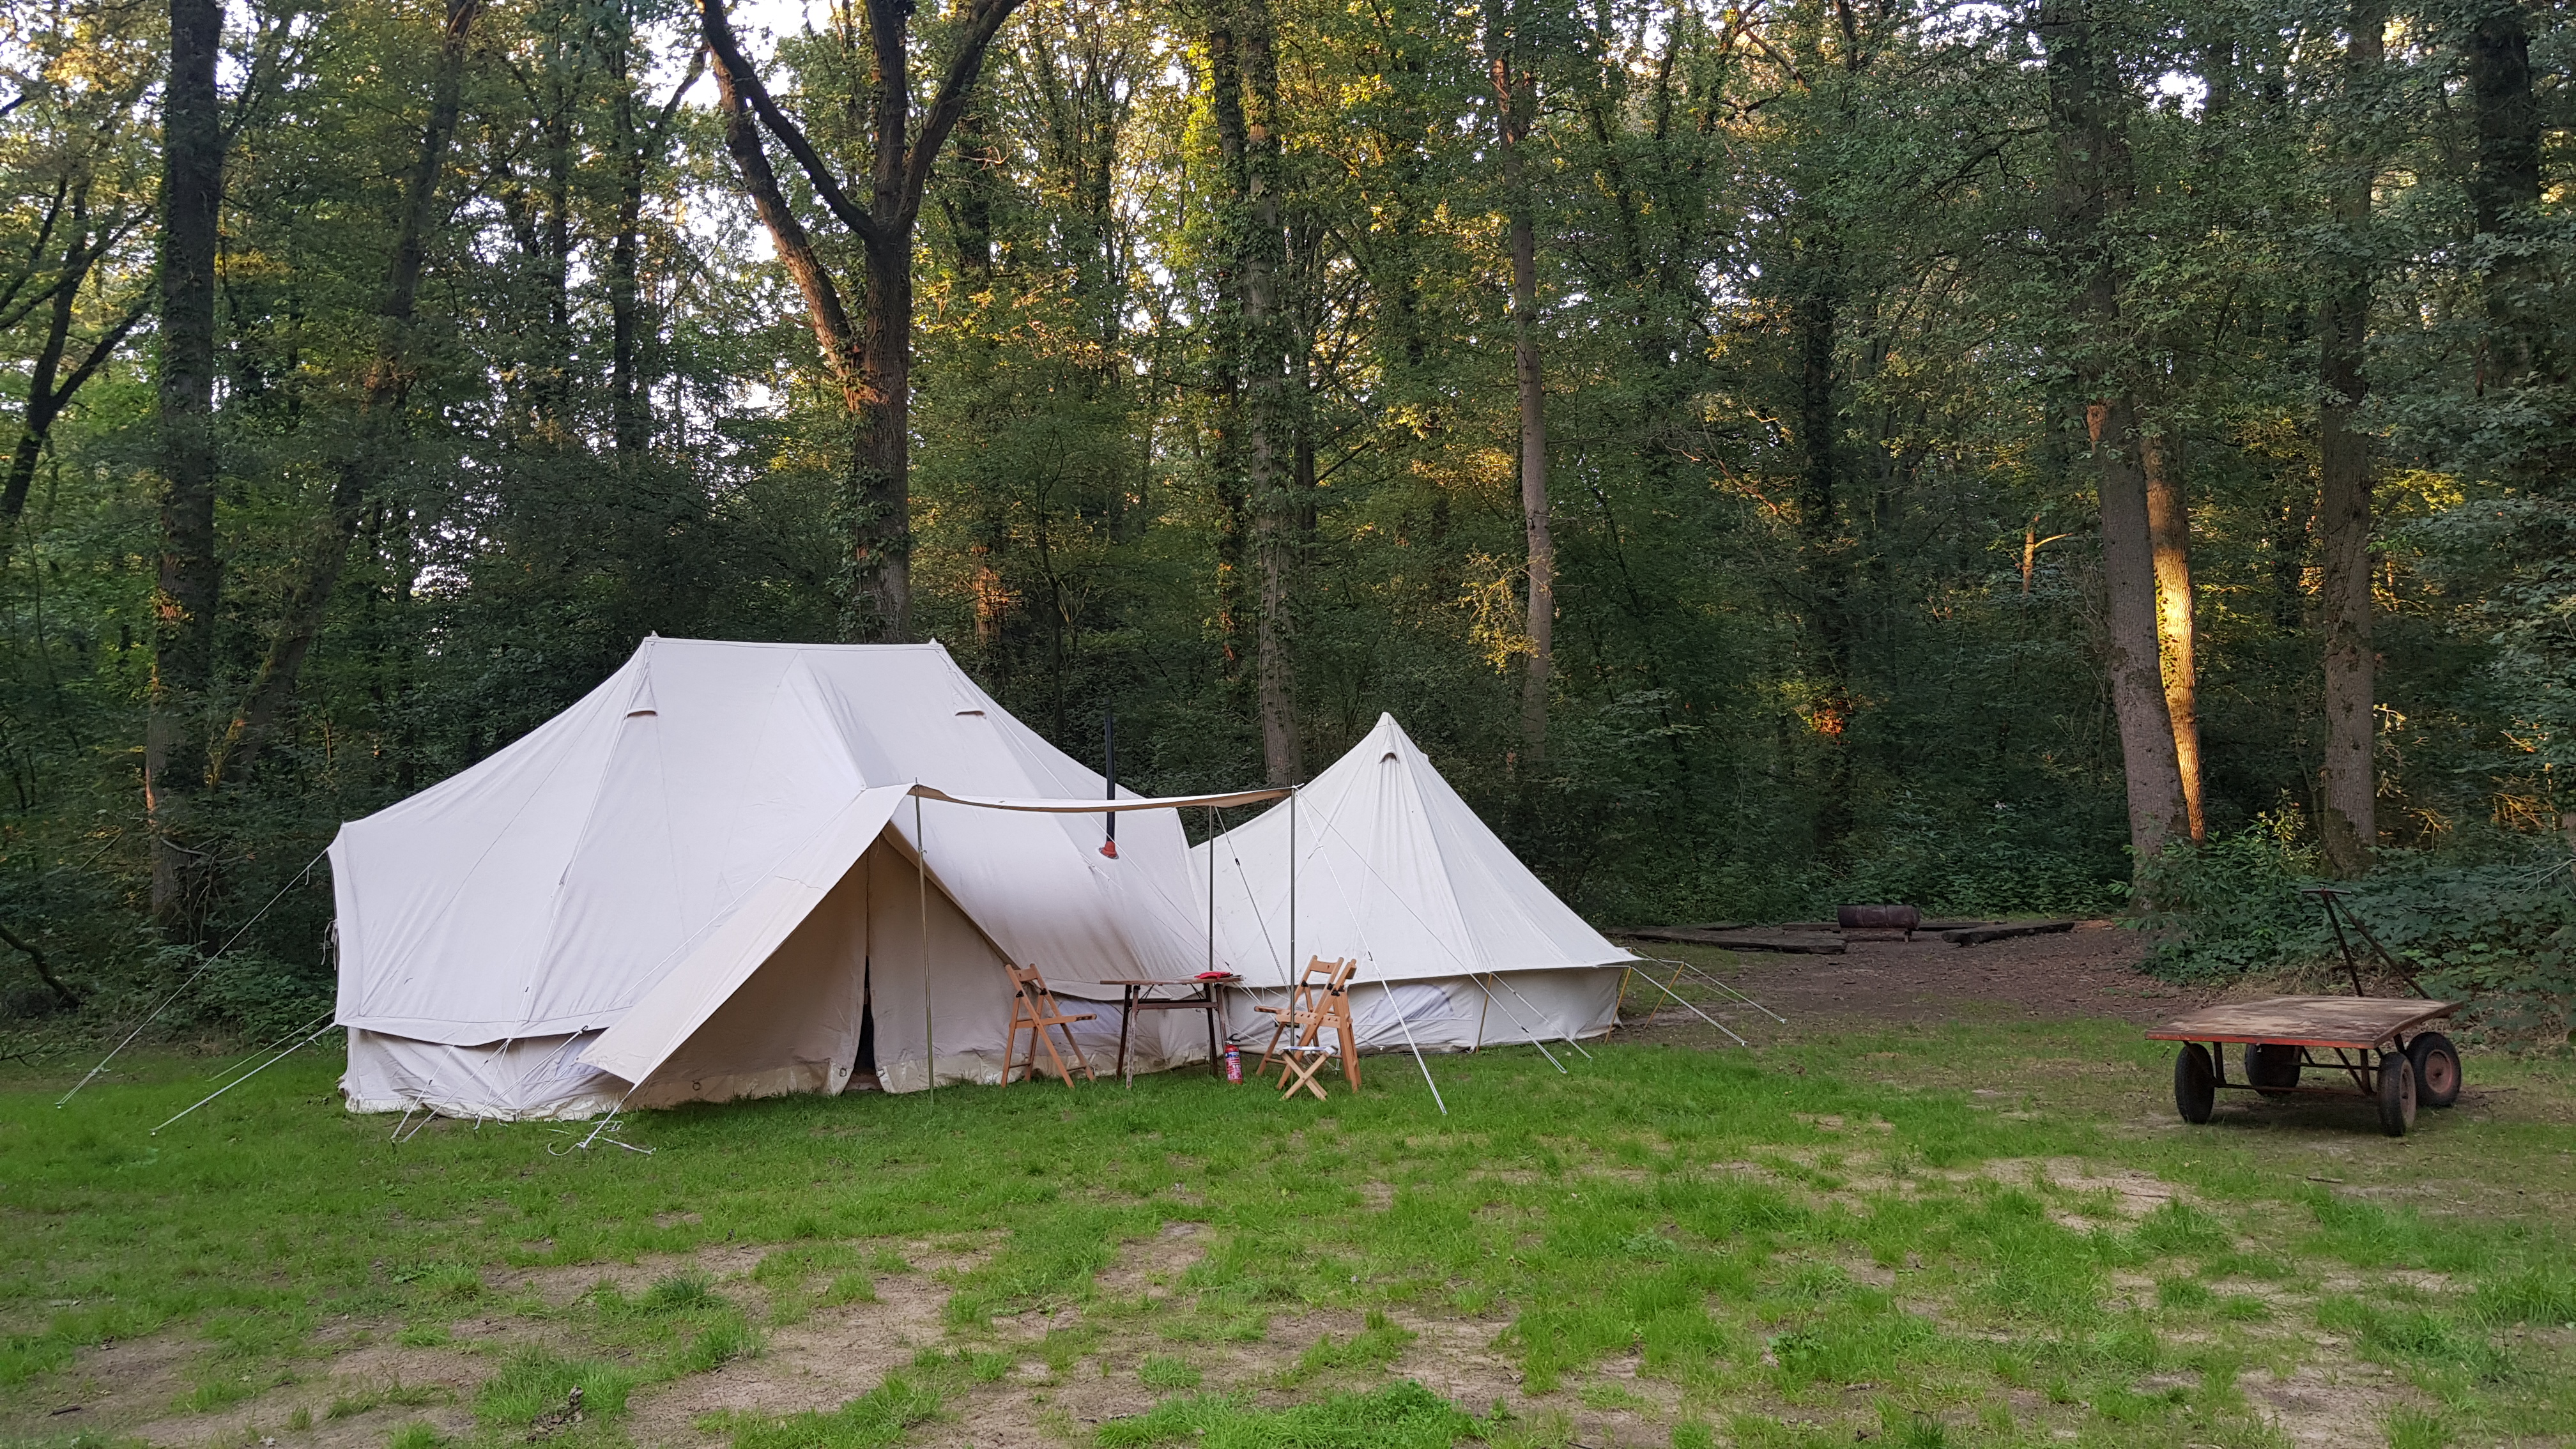 Sahara / Sibley 400 bell tent added